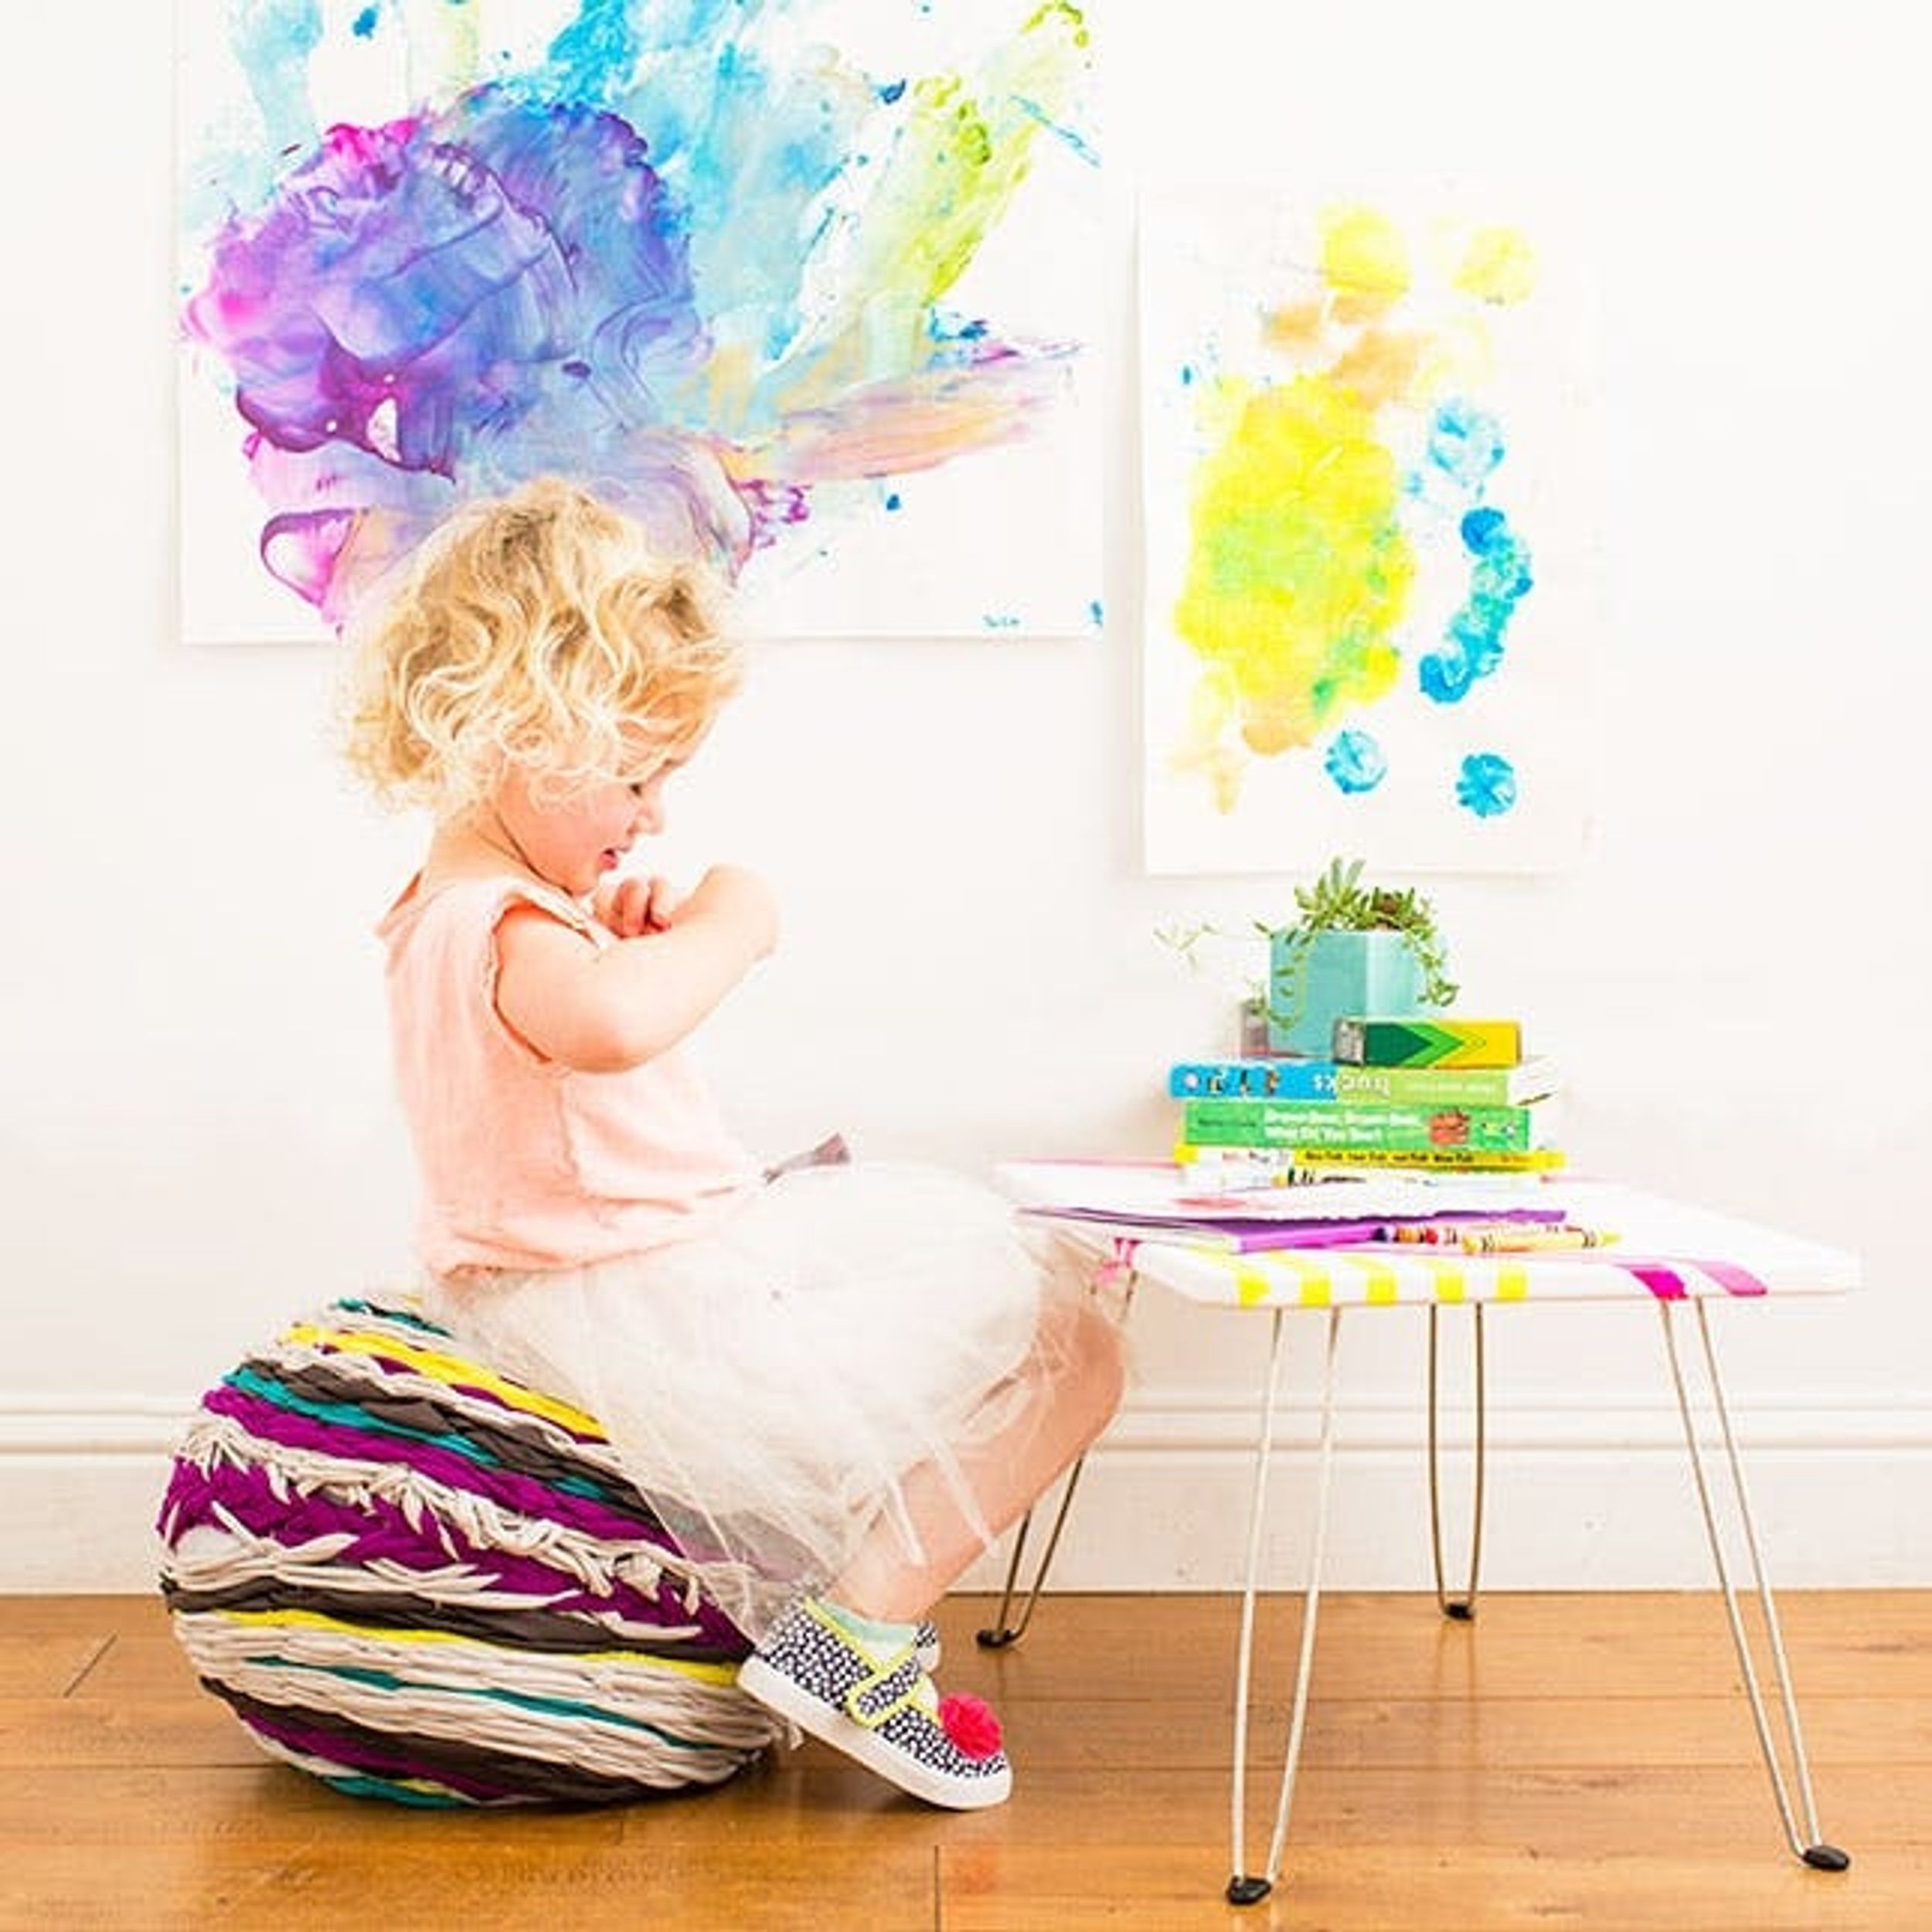 How to Make a Woven Floor Pouf for Your Little One